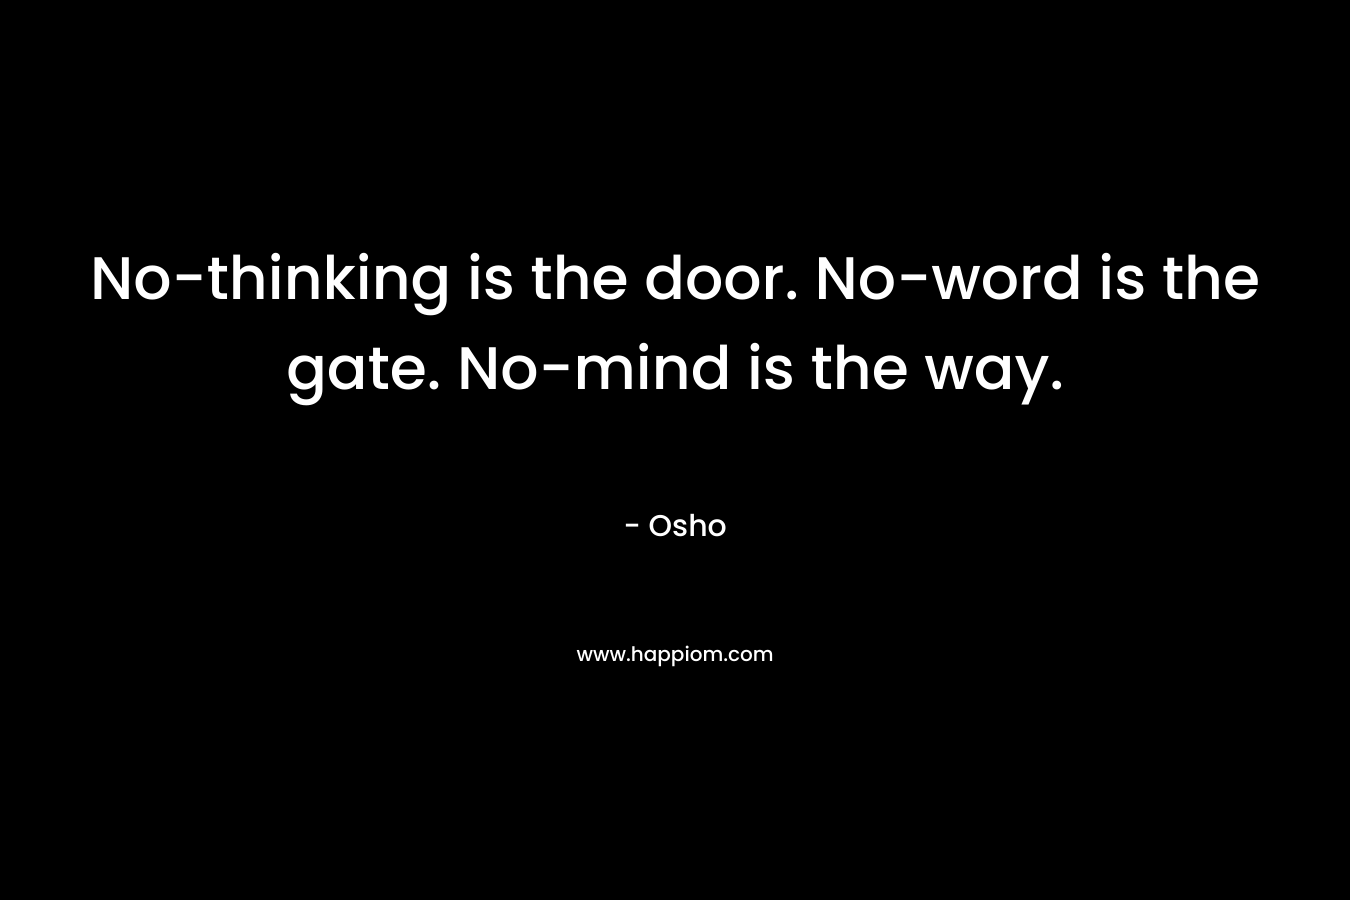 No-thinking is the door. No-word is the gate. No-mind is the way.